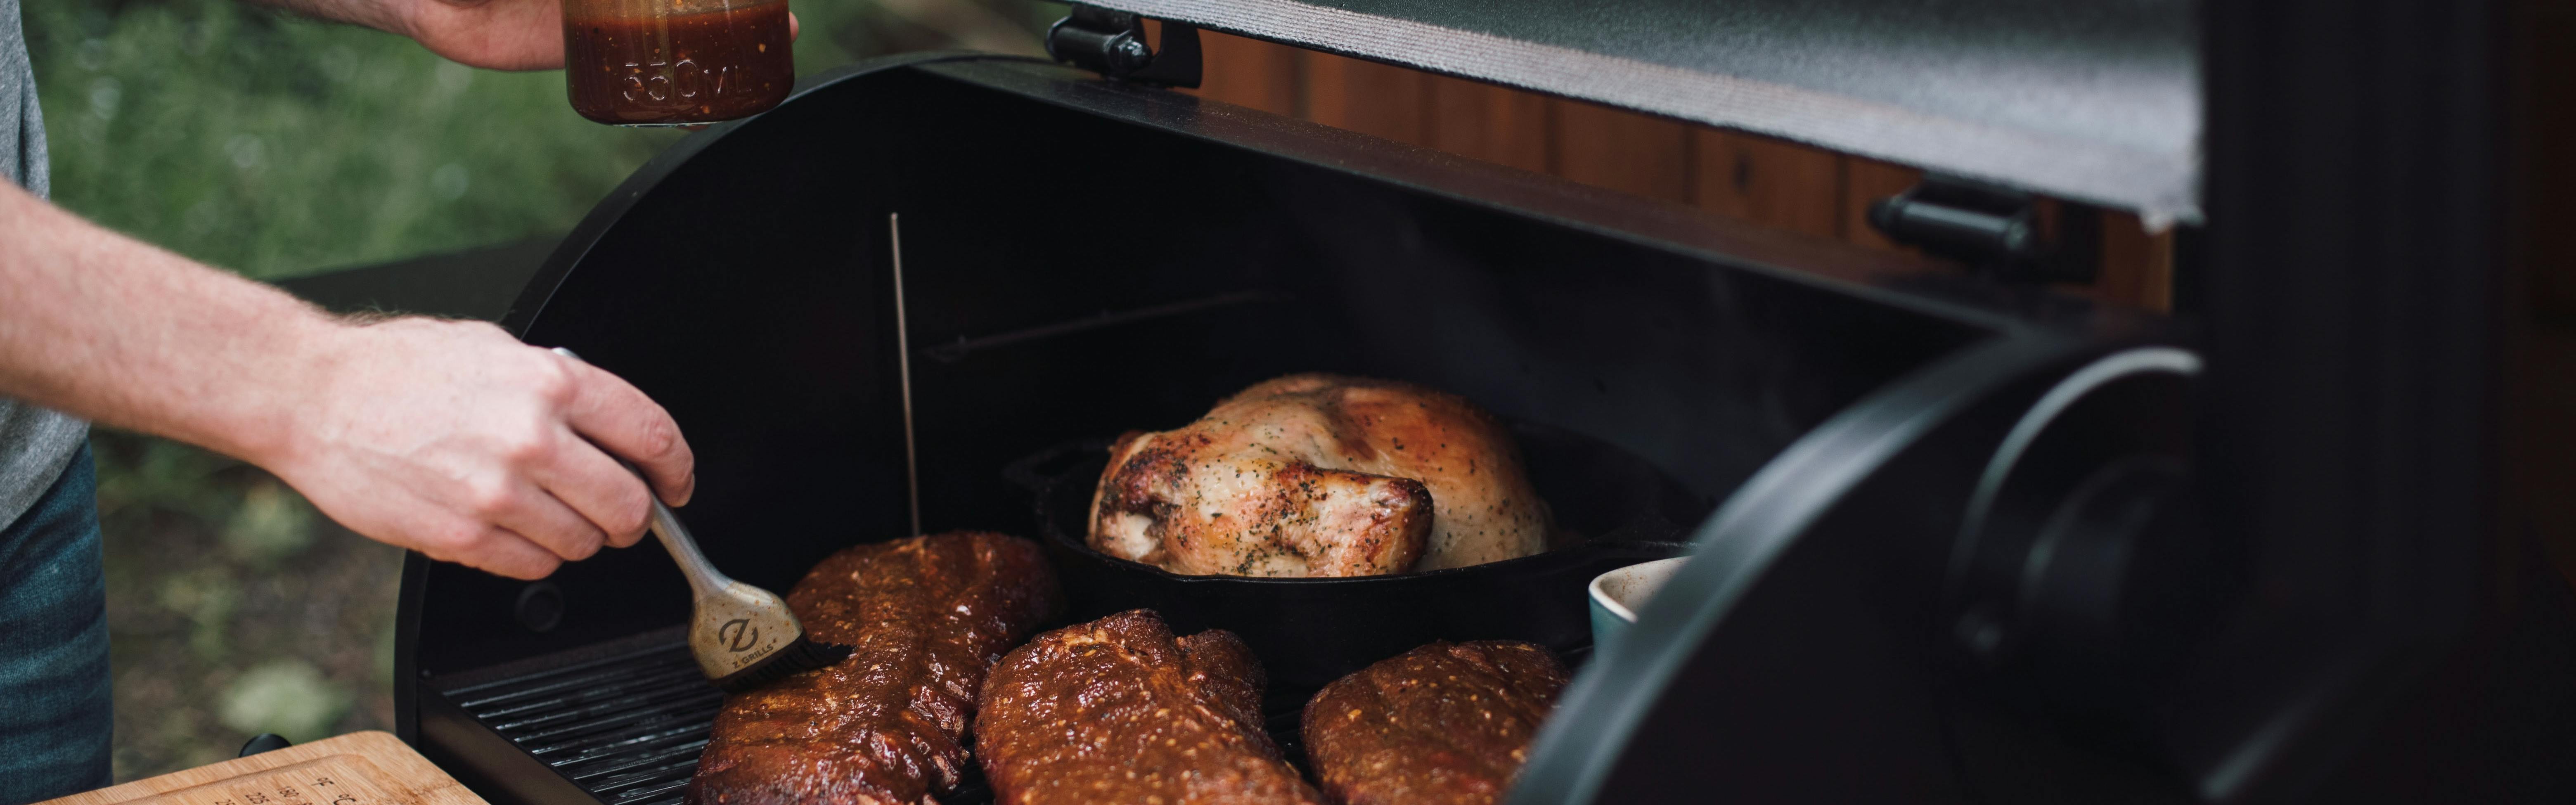 Pellet grill or smoker? Here's what BBQ experts recommend